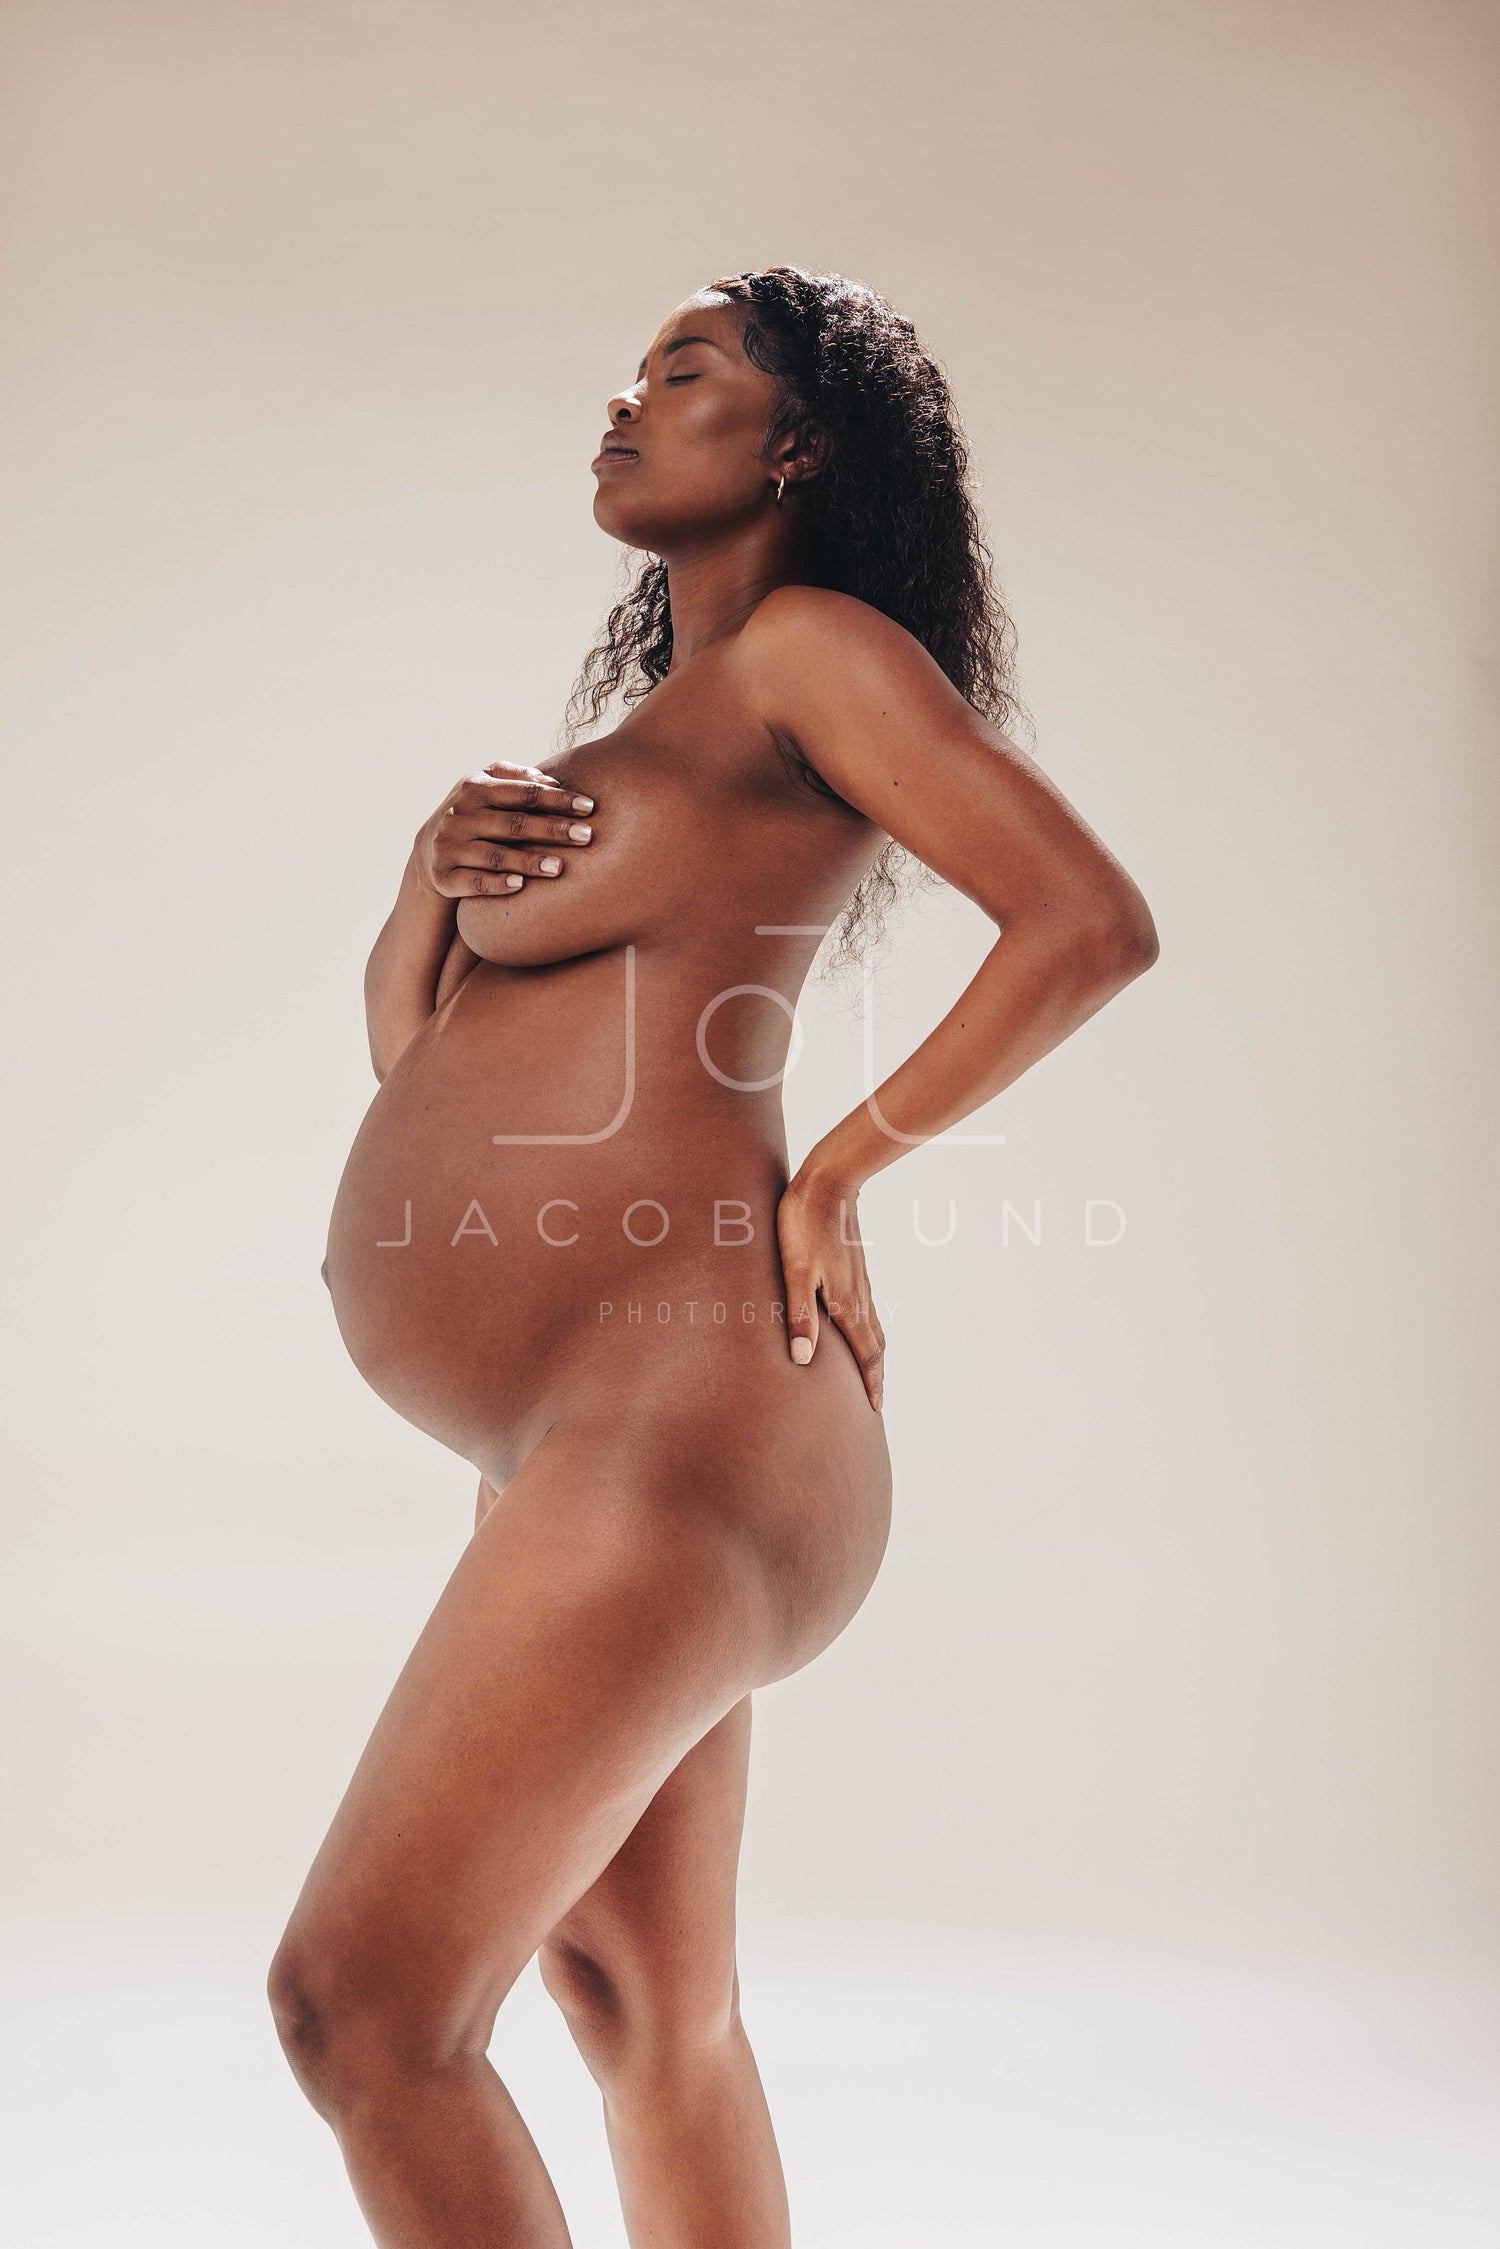 African Naked Pregnant Ladies - Antenatal body positivity: Pregnant black woman showing her naked body â€“  Jacob Lund Photography Store- premium stock photo